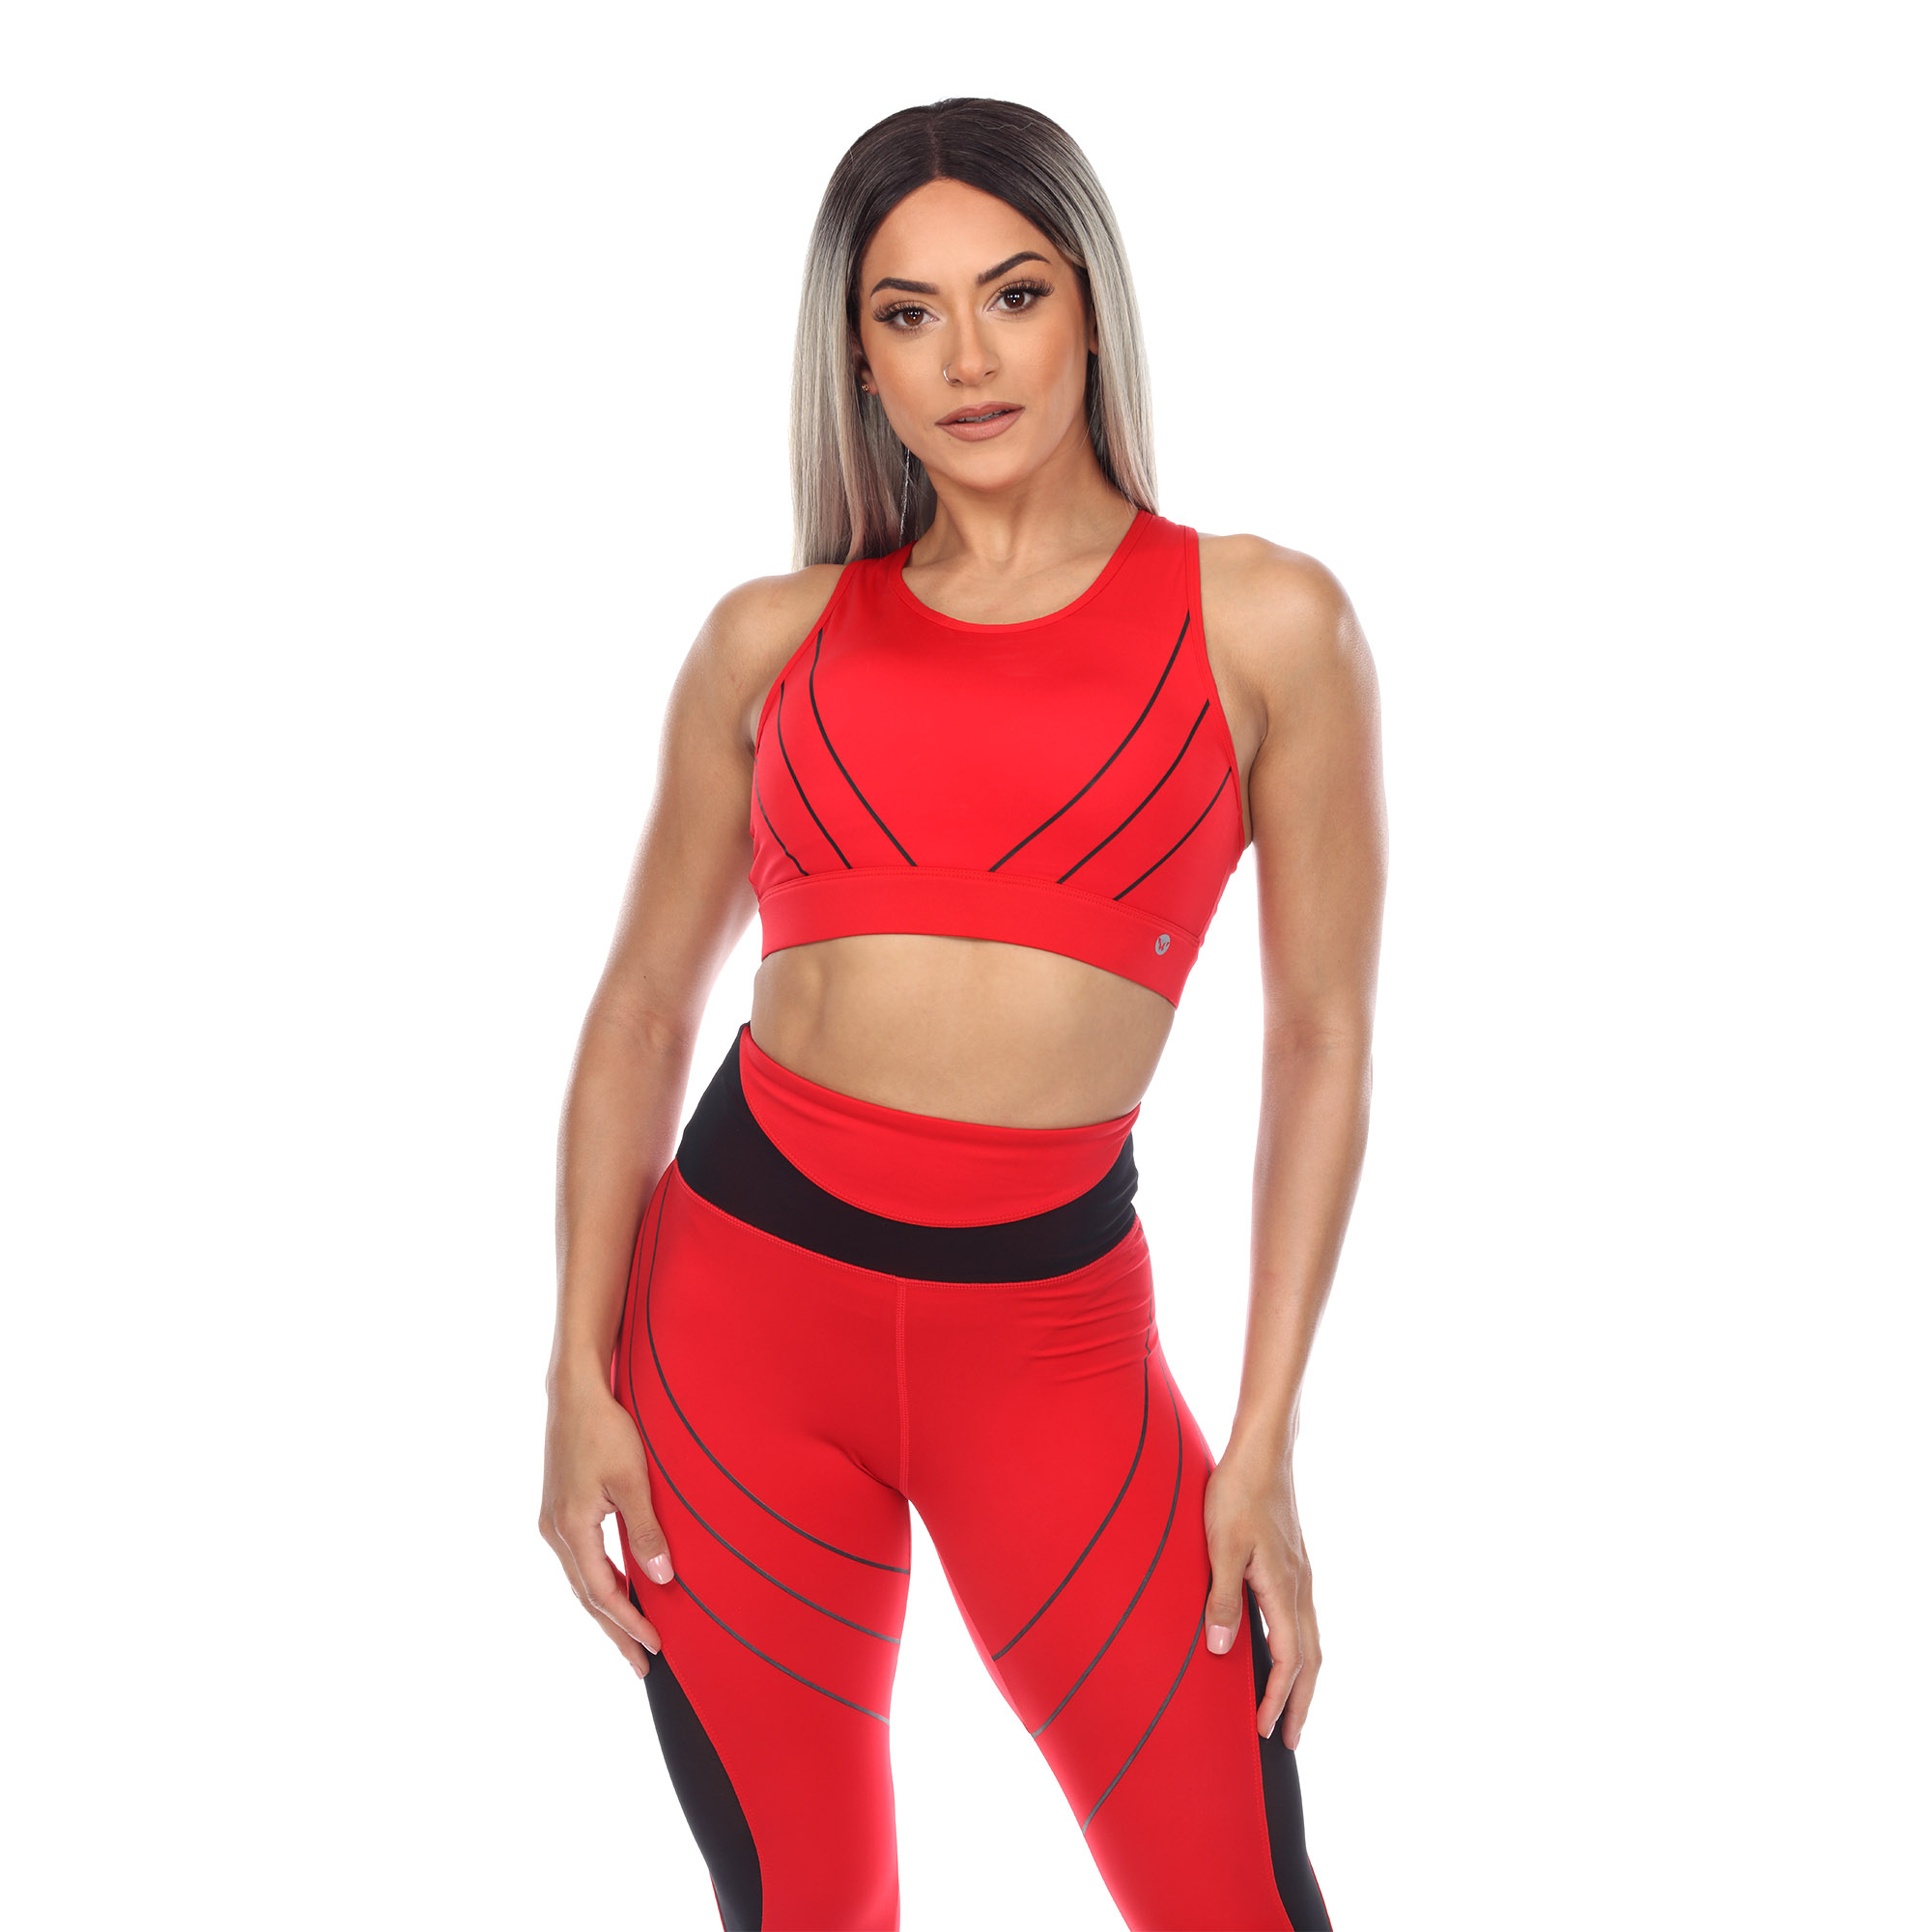 White Mark Women's Cut Out Back Mesh Sports Bra - Red, Small